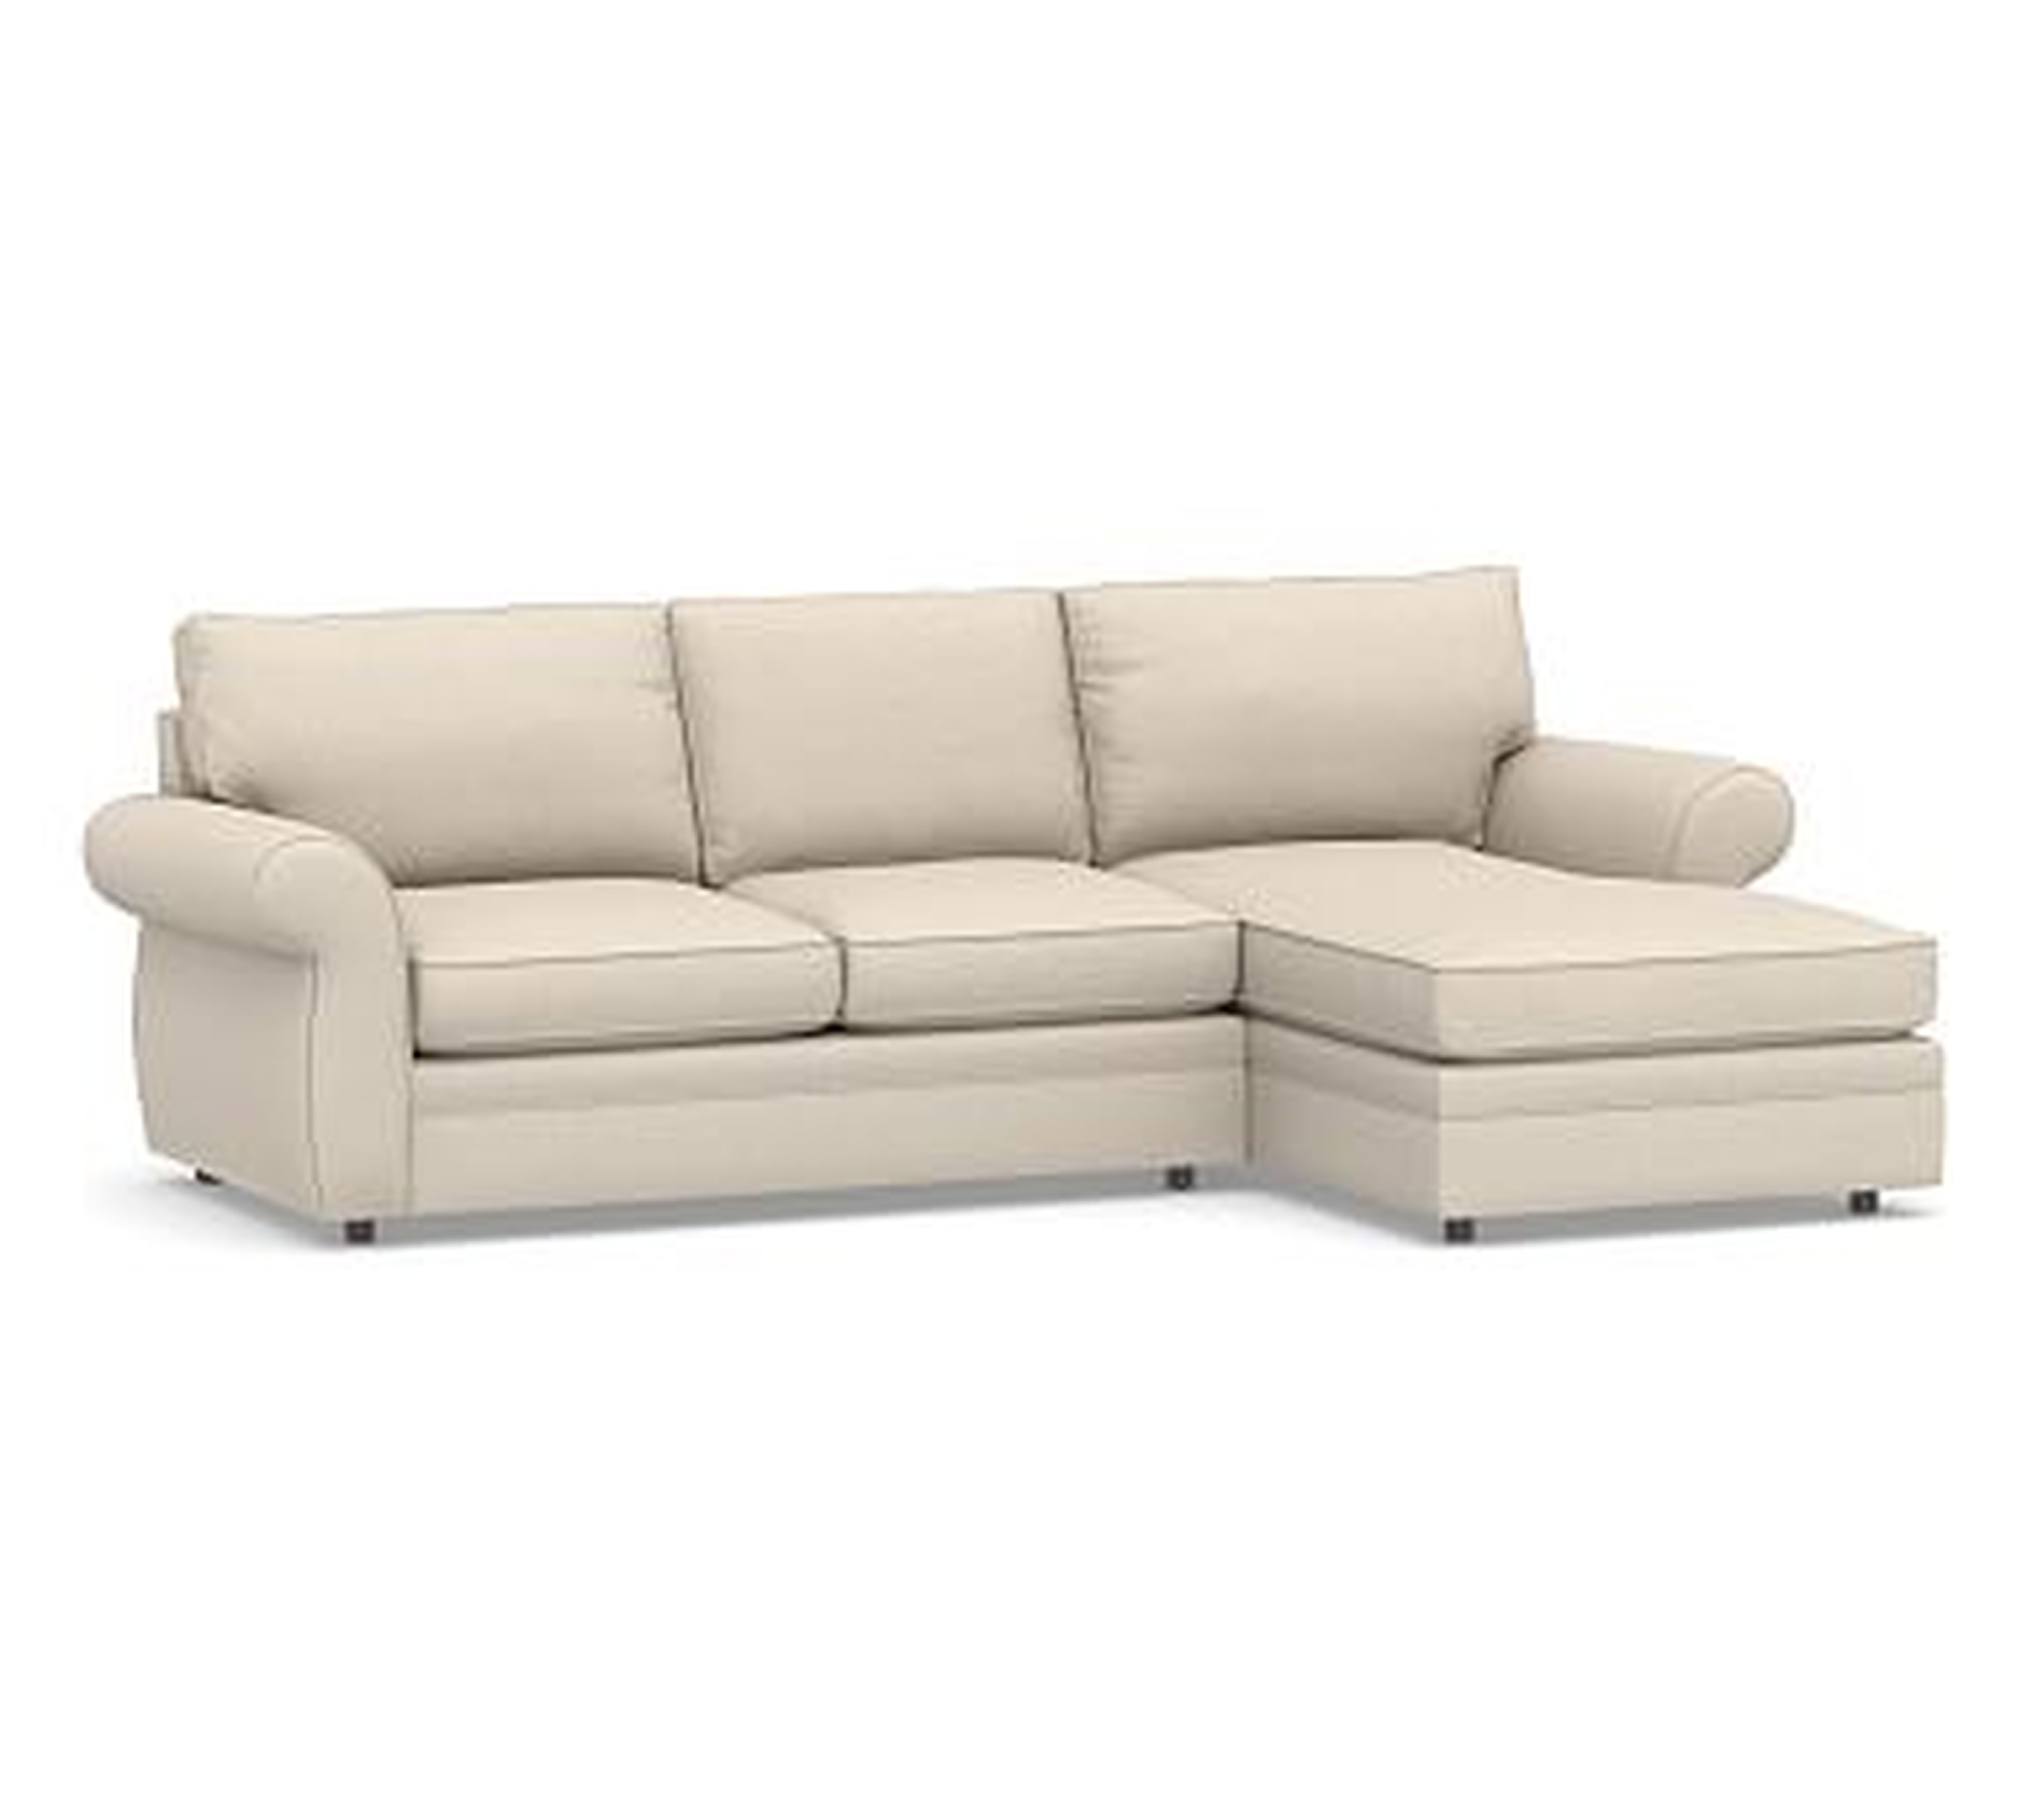 Pearce Roll Arm Upholstered Left Arm Loveseat with Chaise Sectional, Down Blend Wrapped Cushions, Performance Chateau Basketweave Oatmeal - Pottery Barn